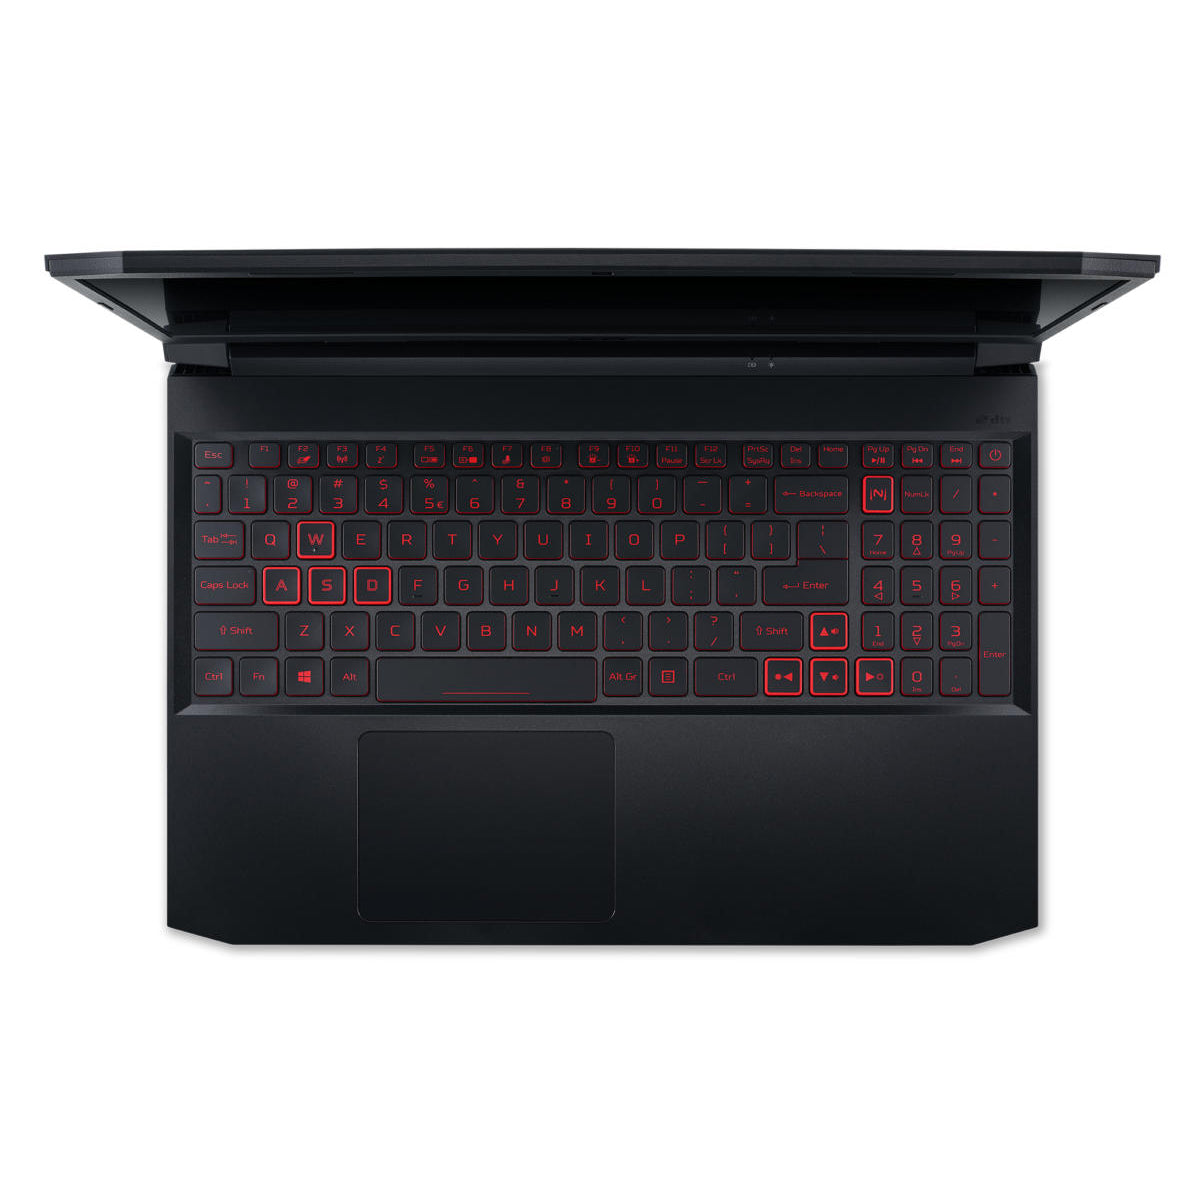 Acer Nitro 5 AN515-57 / NH.QESAA.002 Core i5-11400h Rtx 3050 Ti 144hz Gaming Laptop Offers (New OB)